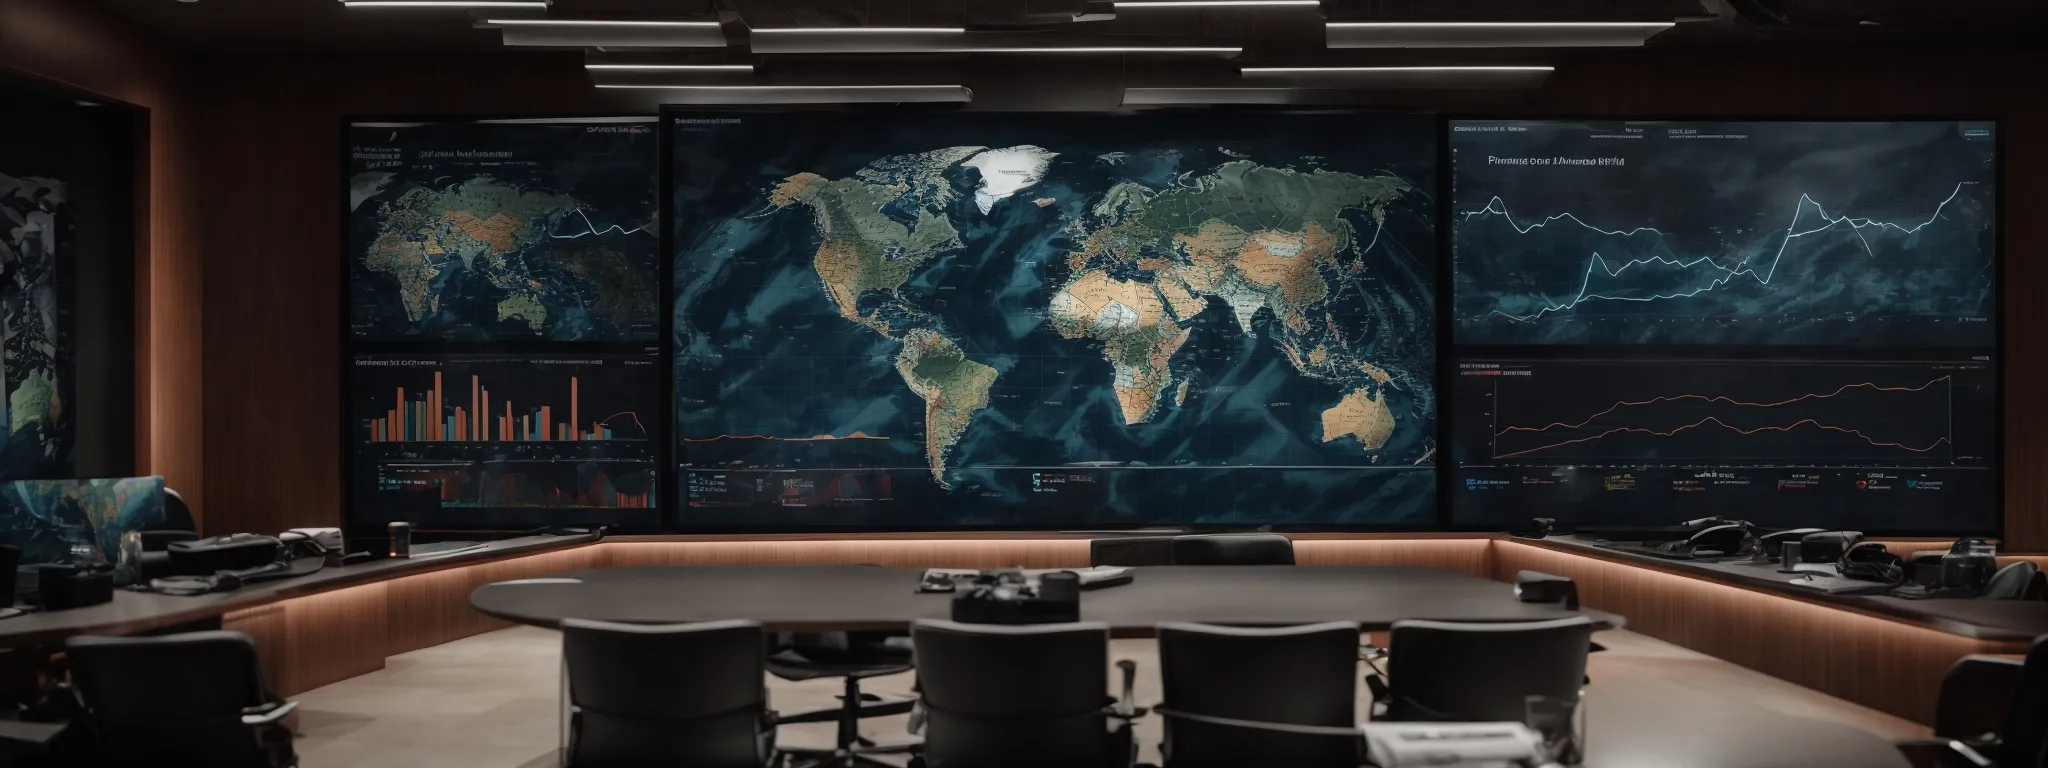 a broad conference room with a large screen display showing graphs and world maps, signifying global market analysis.